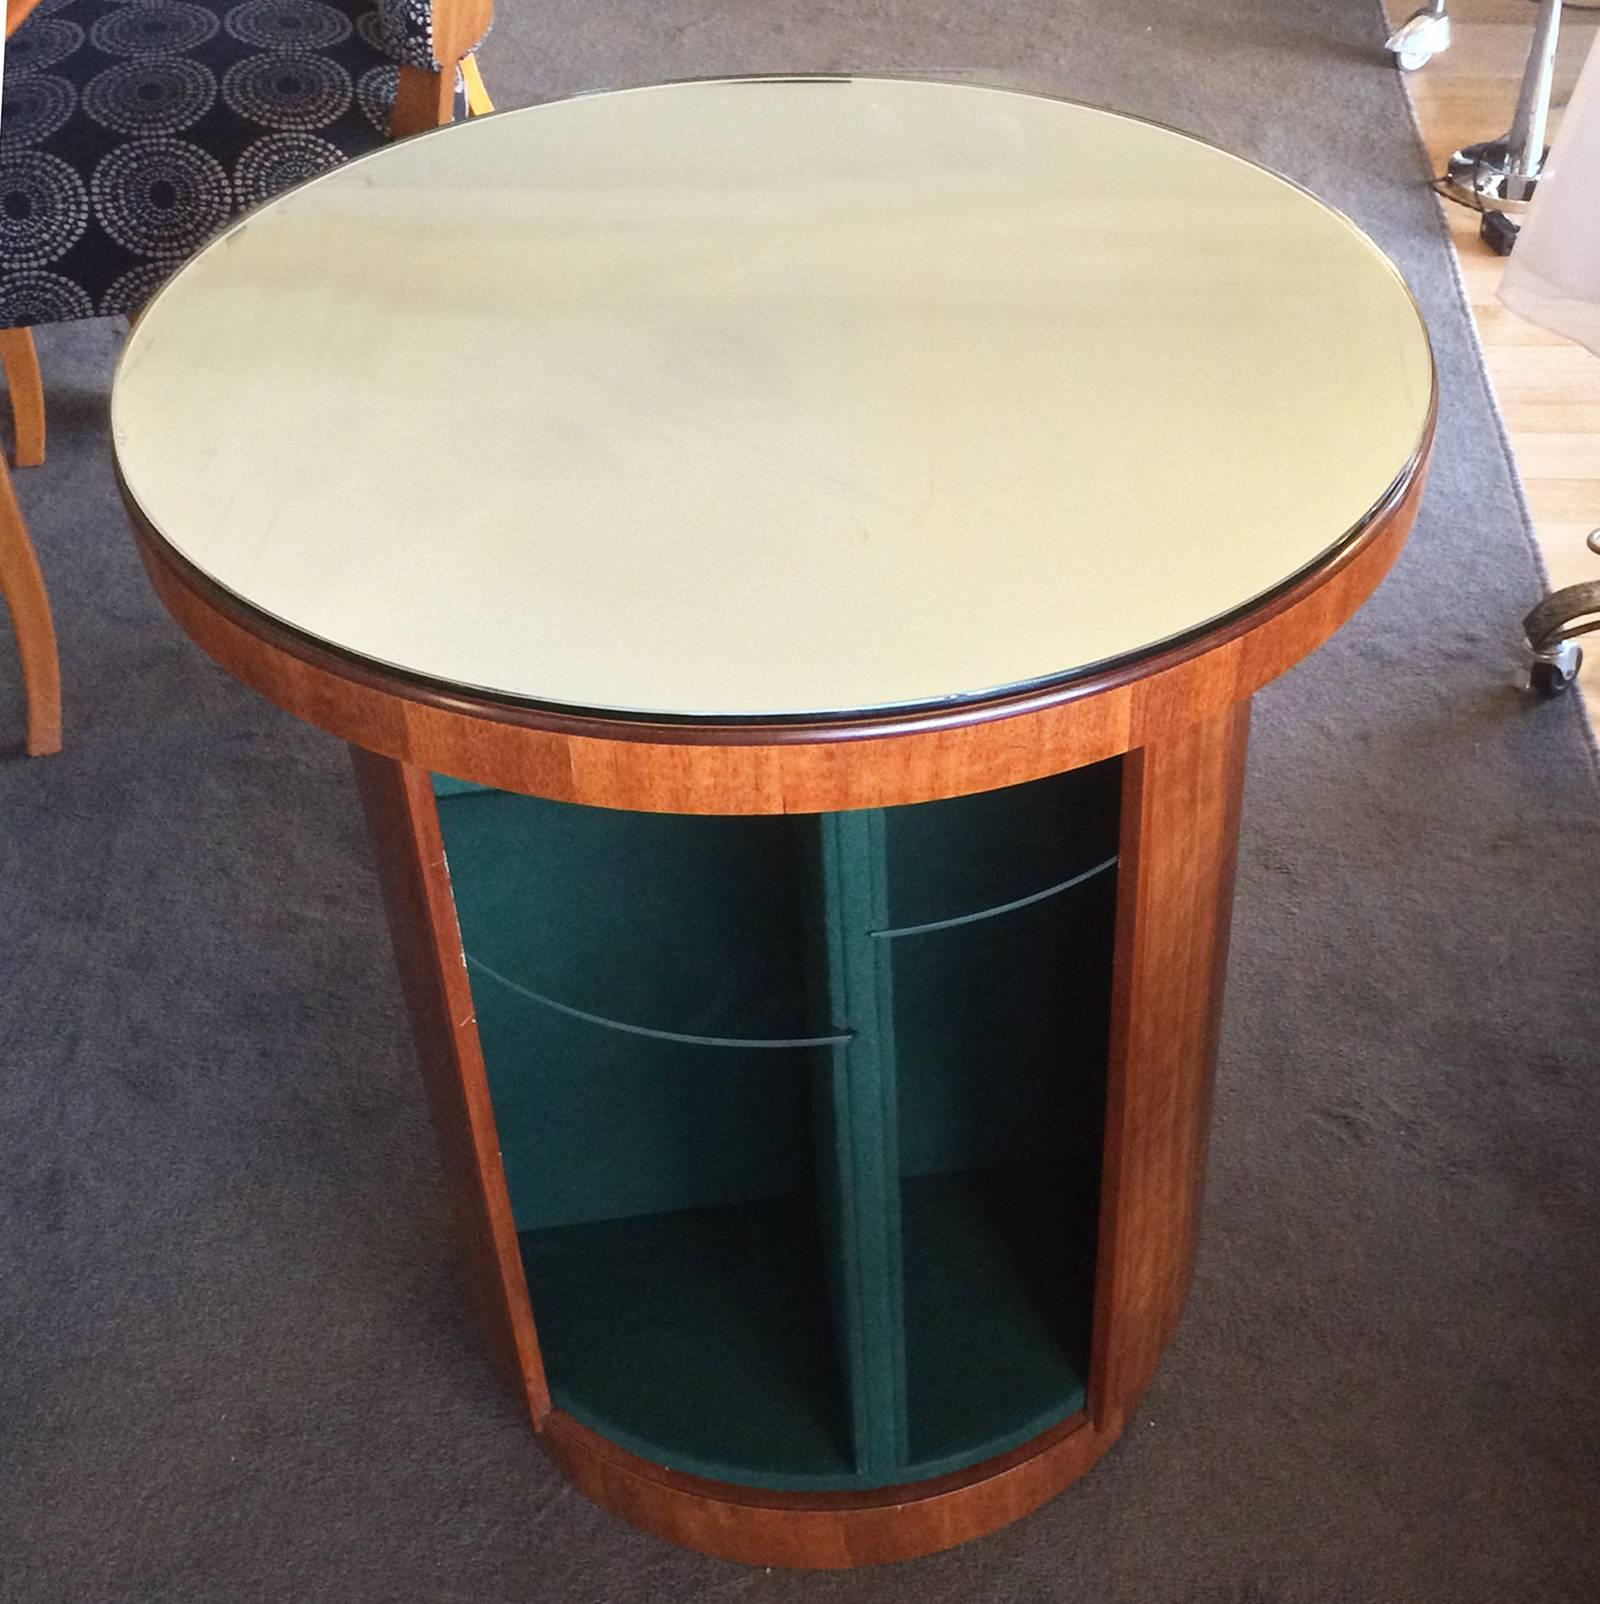 Art Deco, rare round cocktail bar with mirrored top and Rotating inner storage, divided glass shelf areas of various heights. The walls are lined in green felt, and it has a Stepped base. A real statement piece in excellent condition, and in a soft,